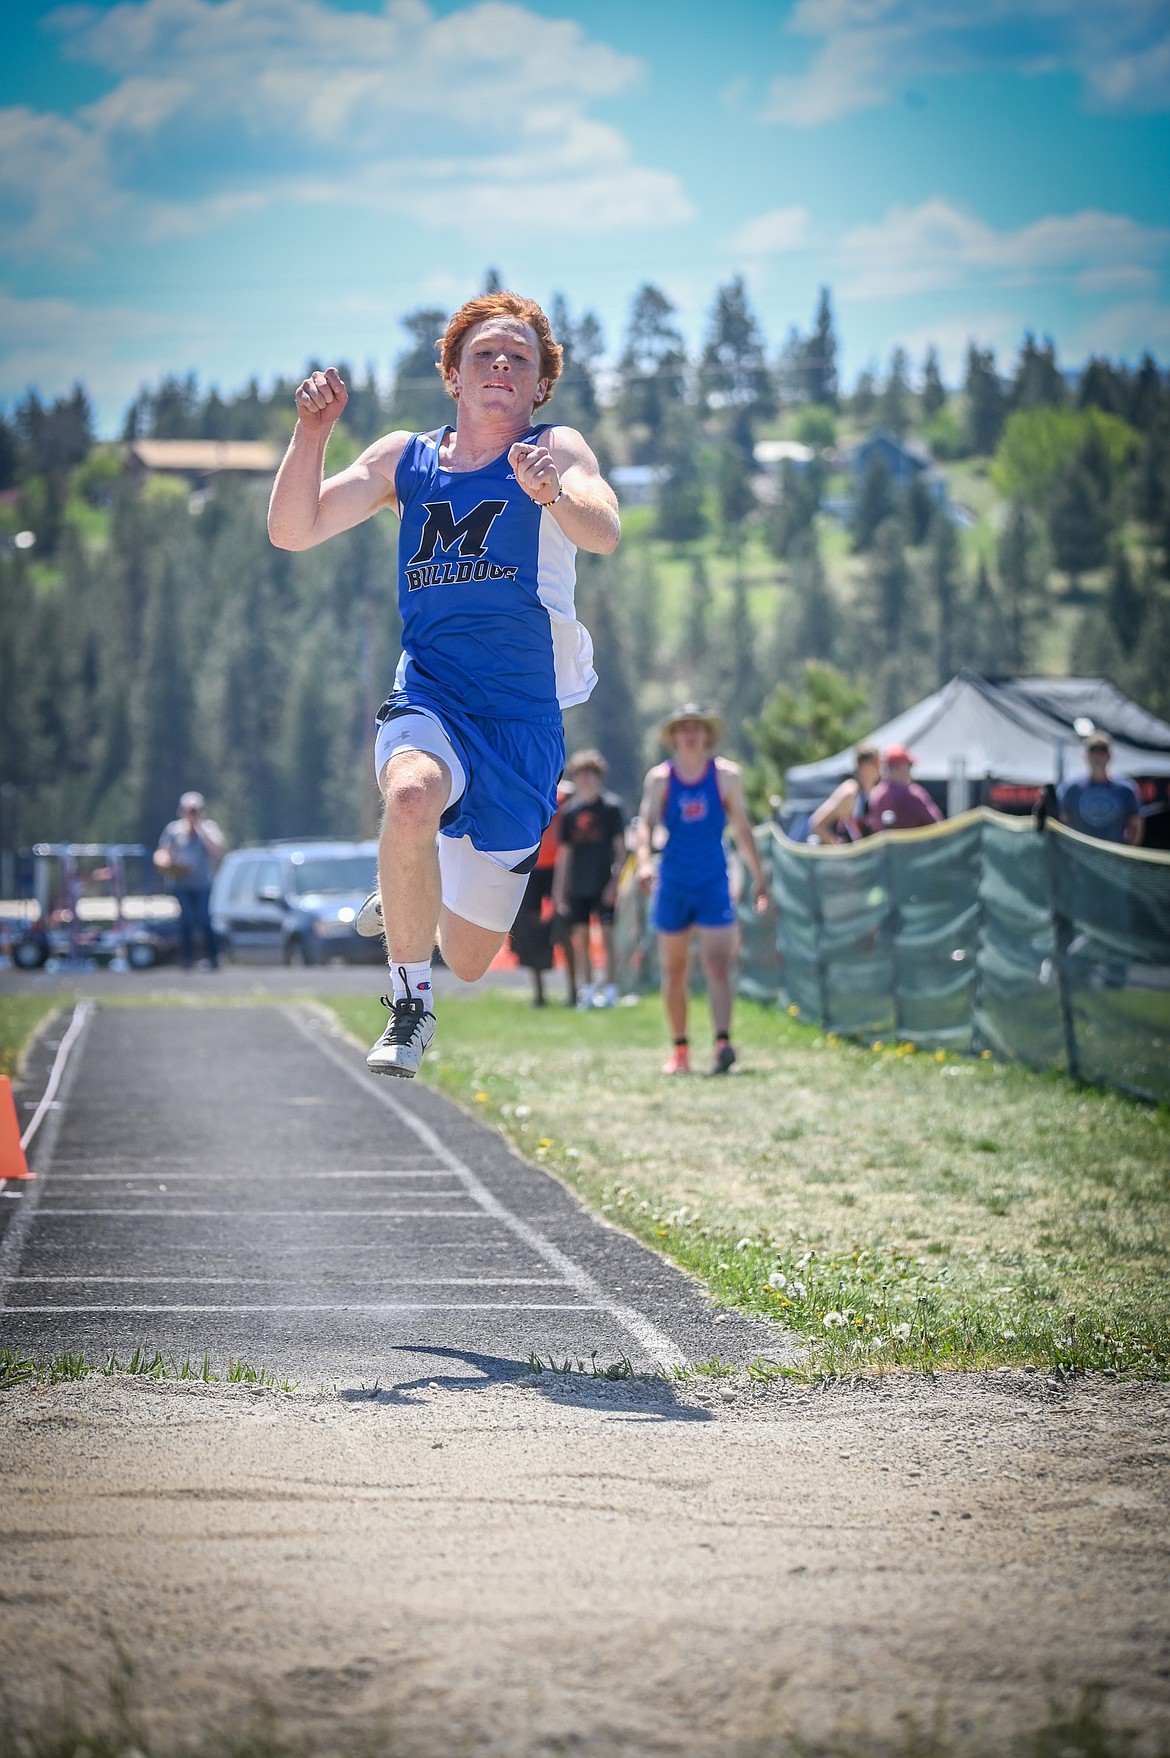 Mission's Bryce Umphrey nailed a first in triple jump and long jump at the District 7B Meet in Eureka. (Christa Umphrey photo)